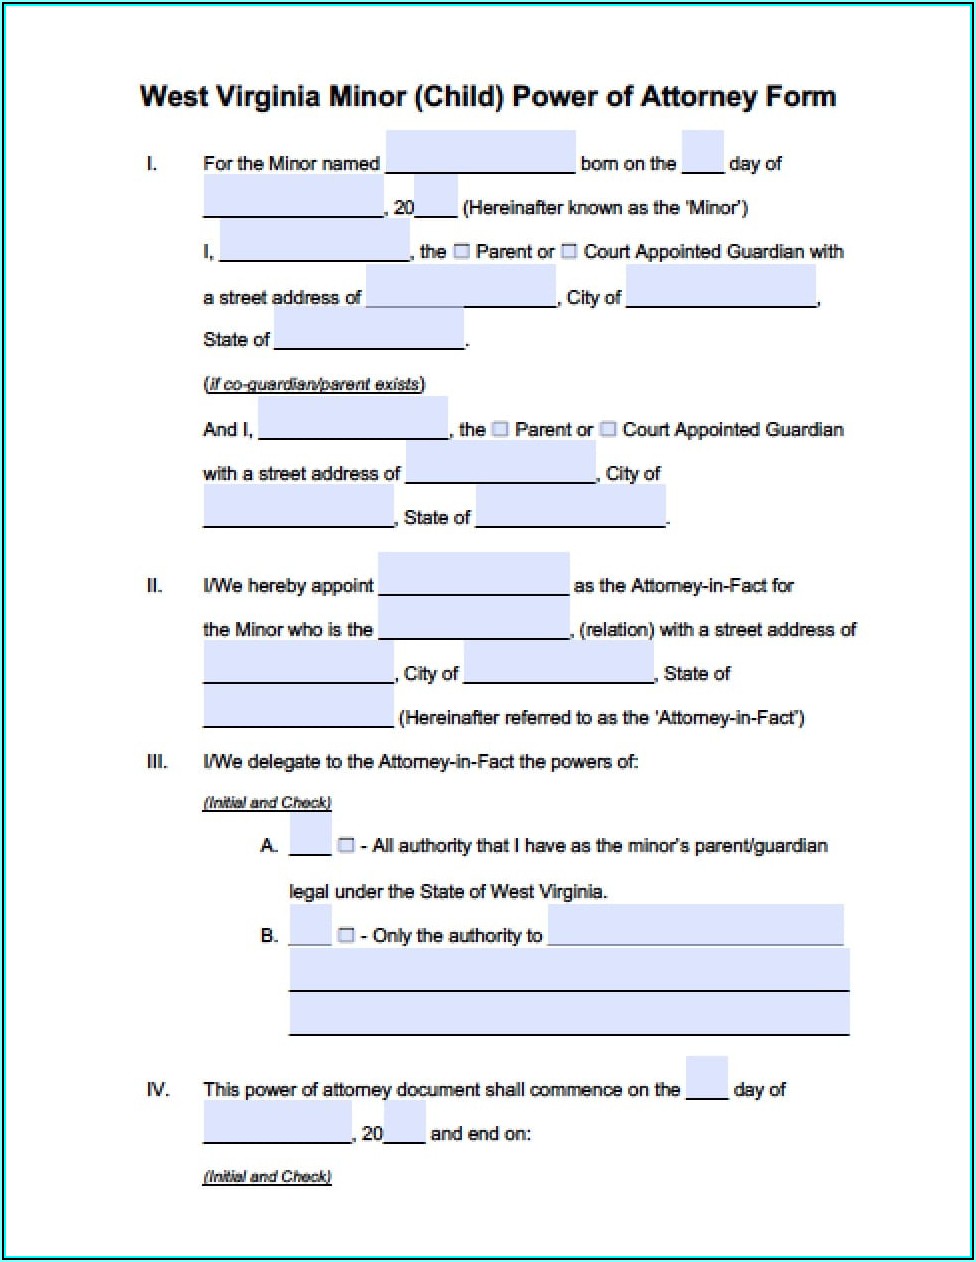 West Virginia State Tax Department Power Of Attorney Form